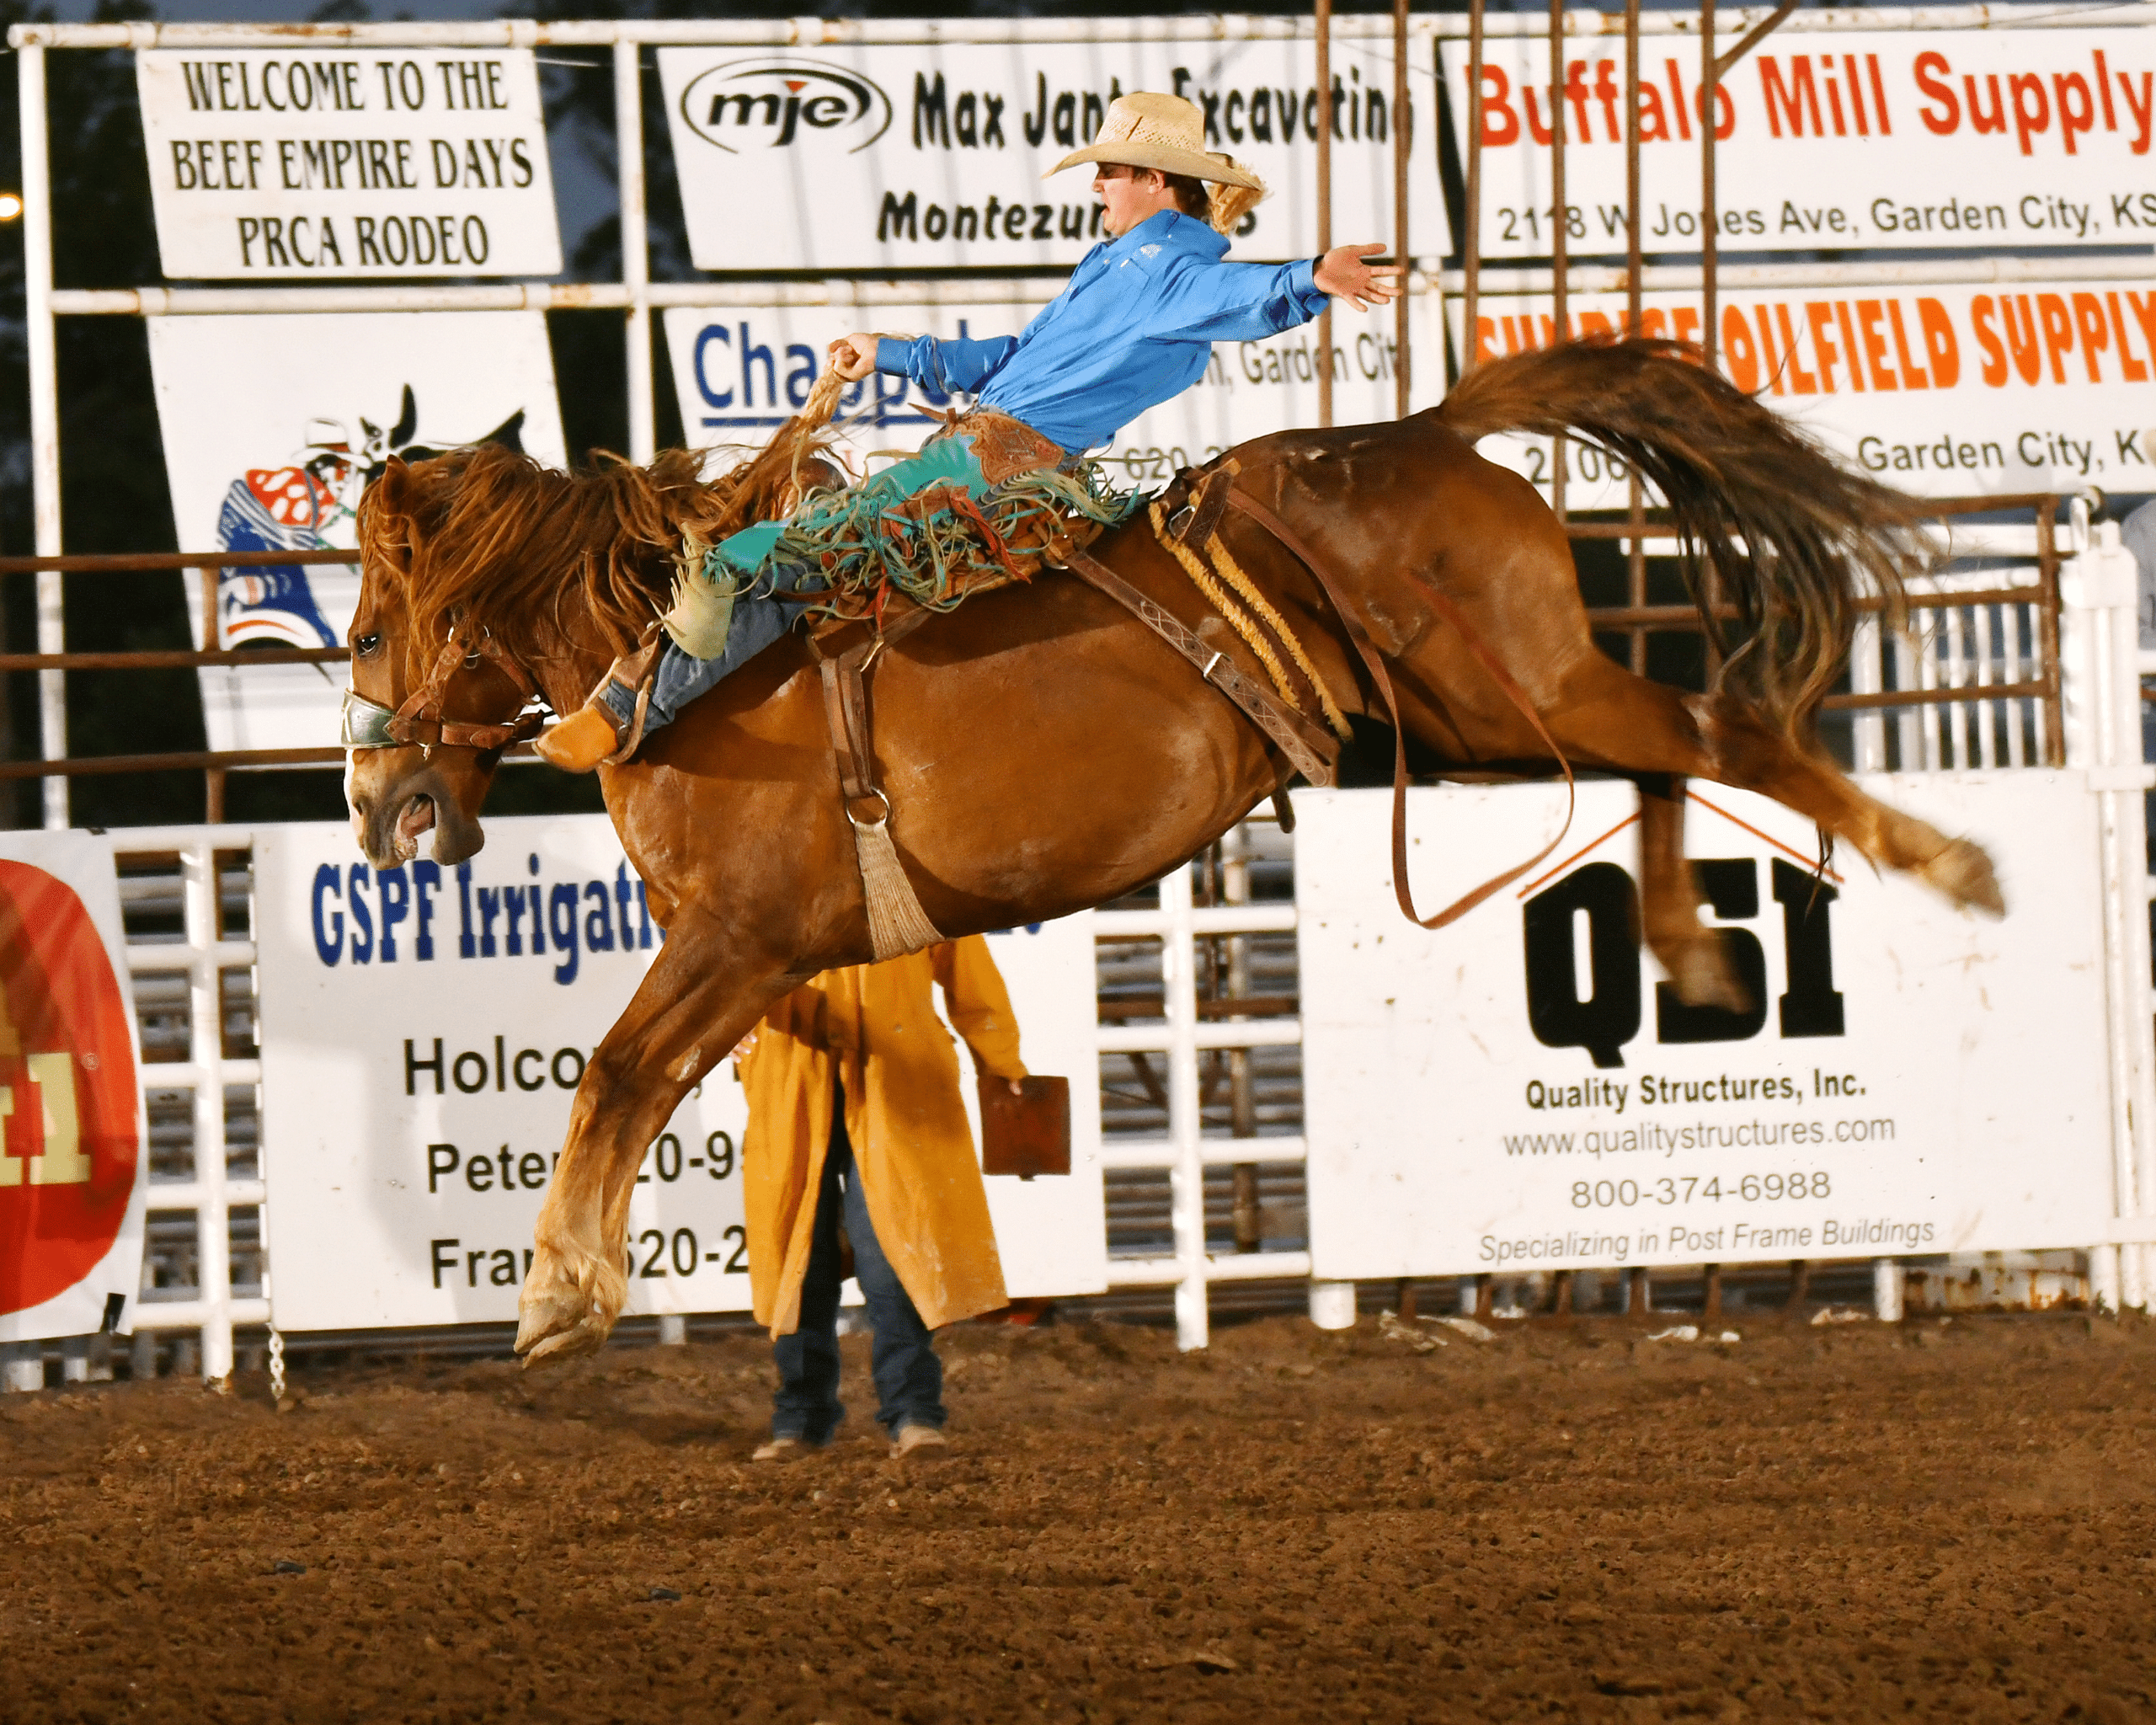 Garden City Rodeo Guide – Part 1: Overview